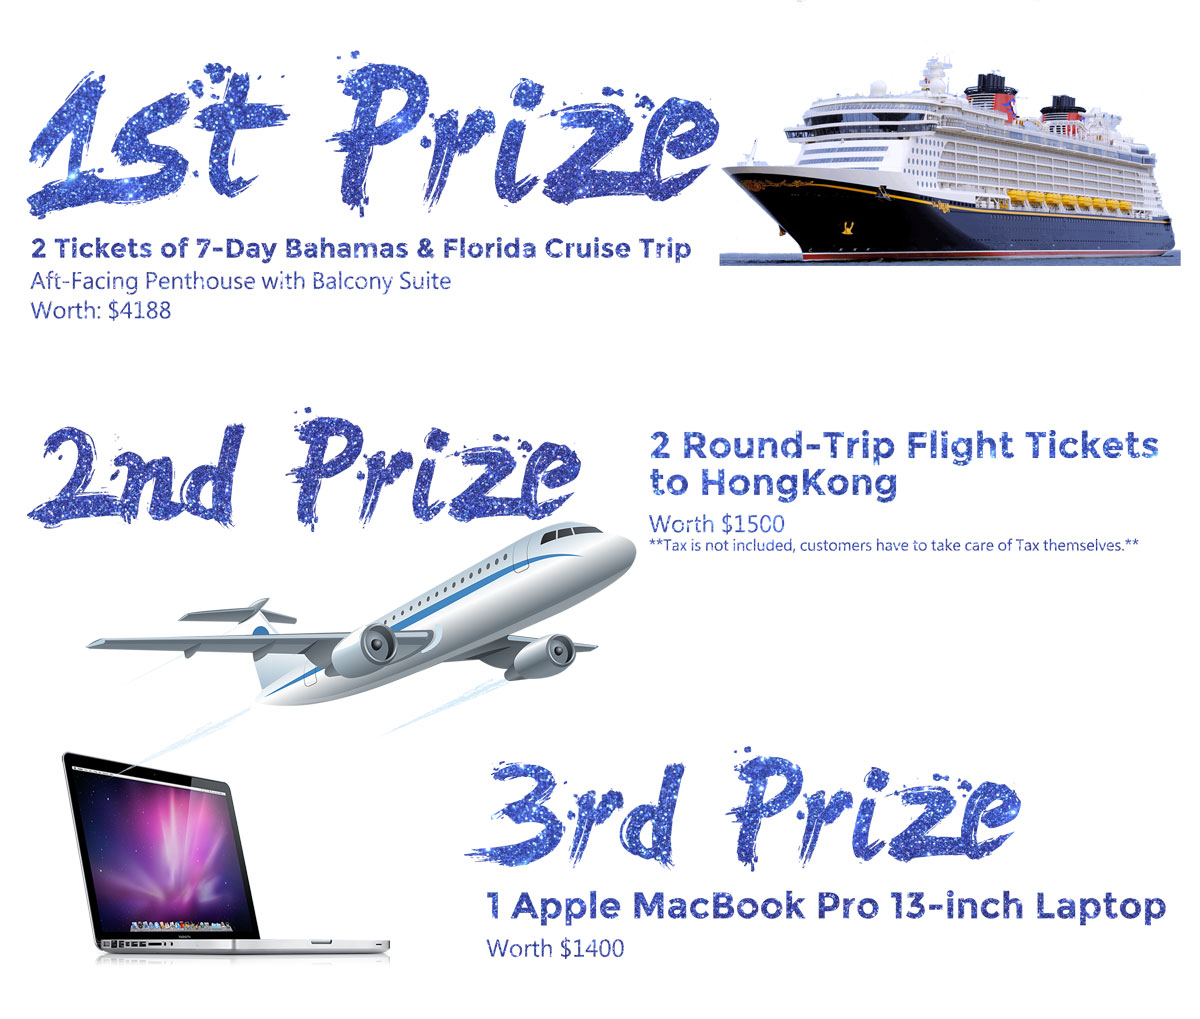 Chinese New Year Raffle: Win $10,000 Worth of Prizes